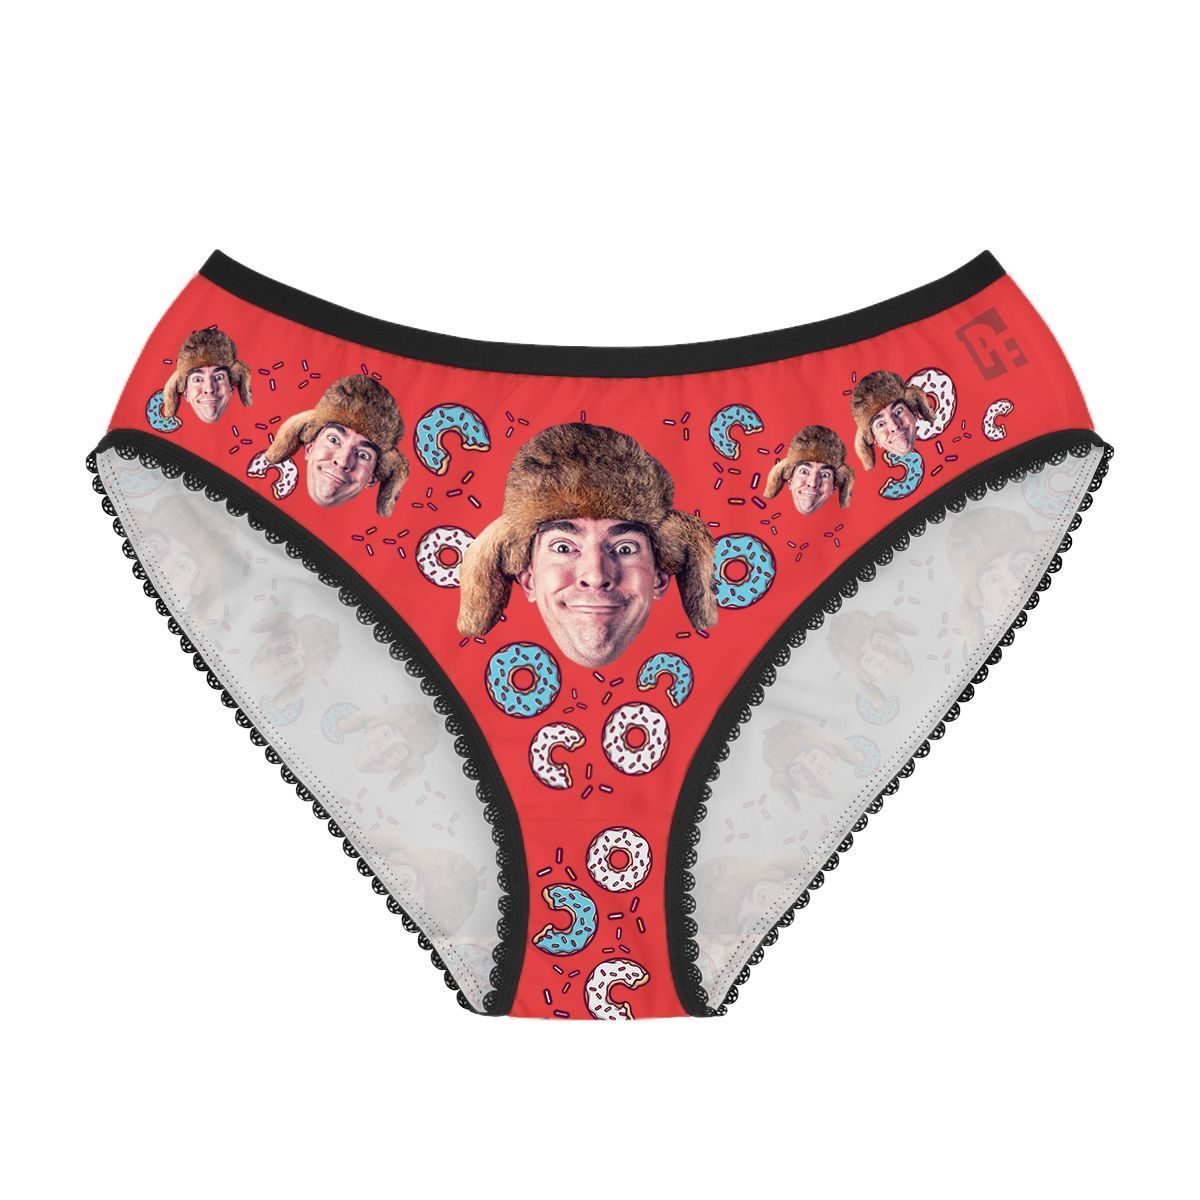 Red Donuts women's underwear briefs personalized with photo printed on them